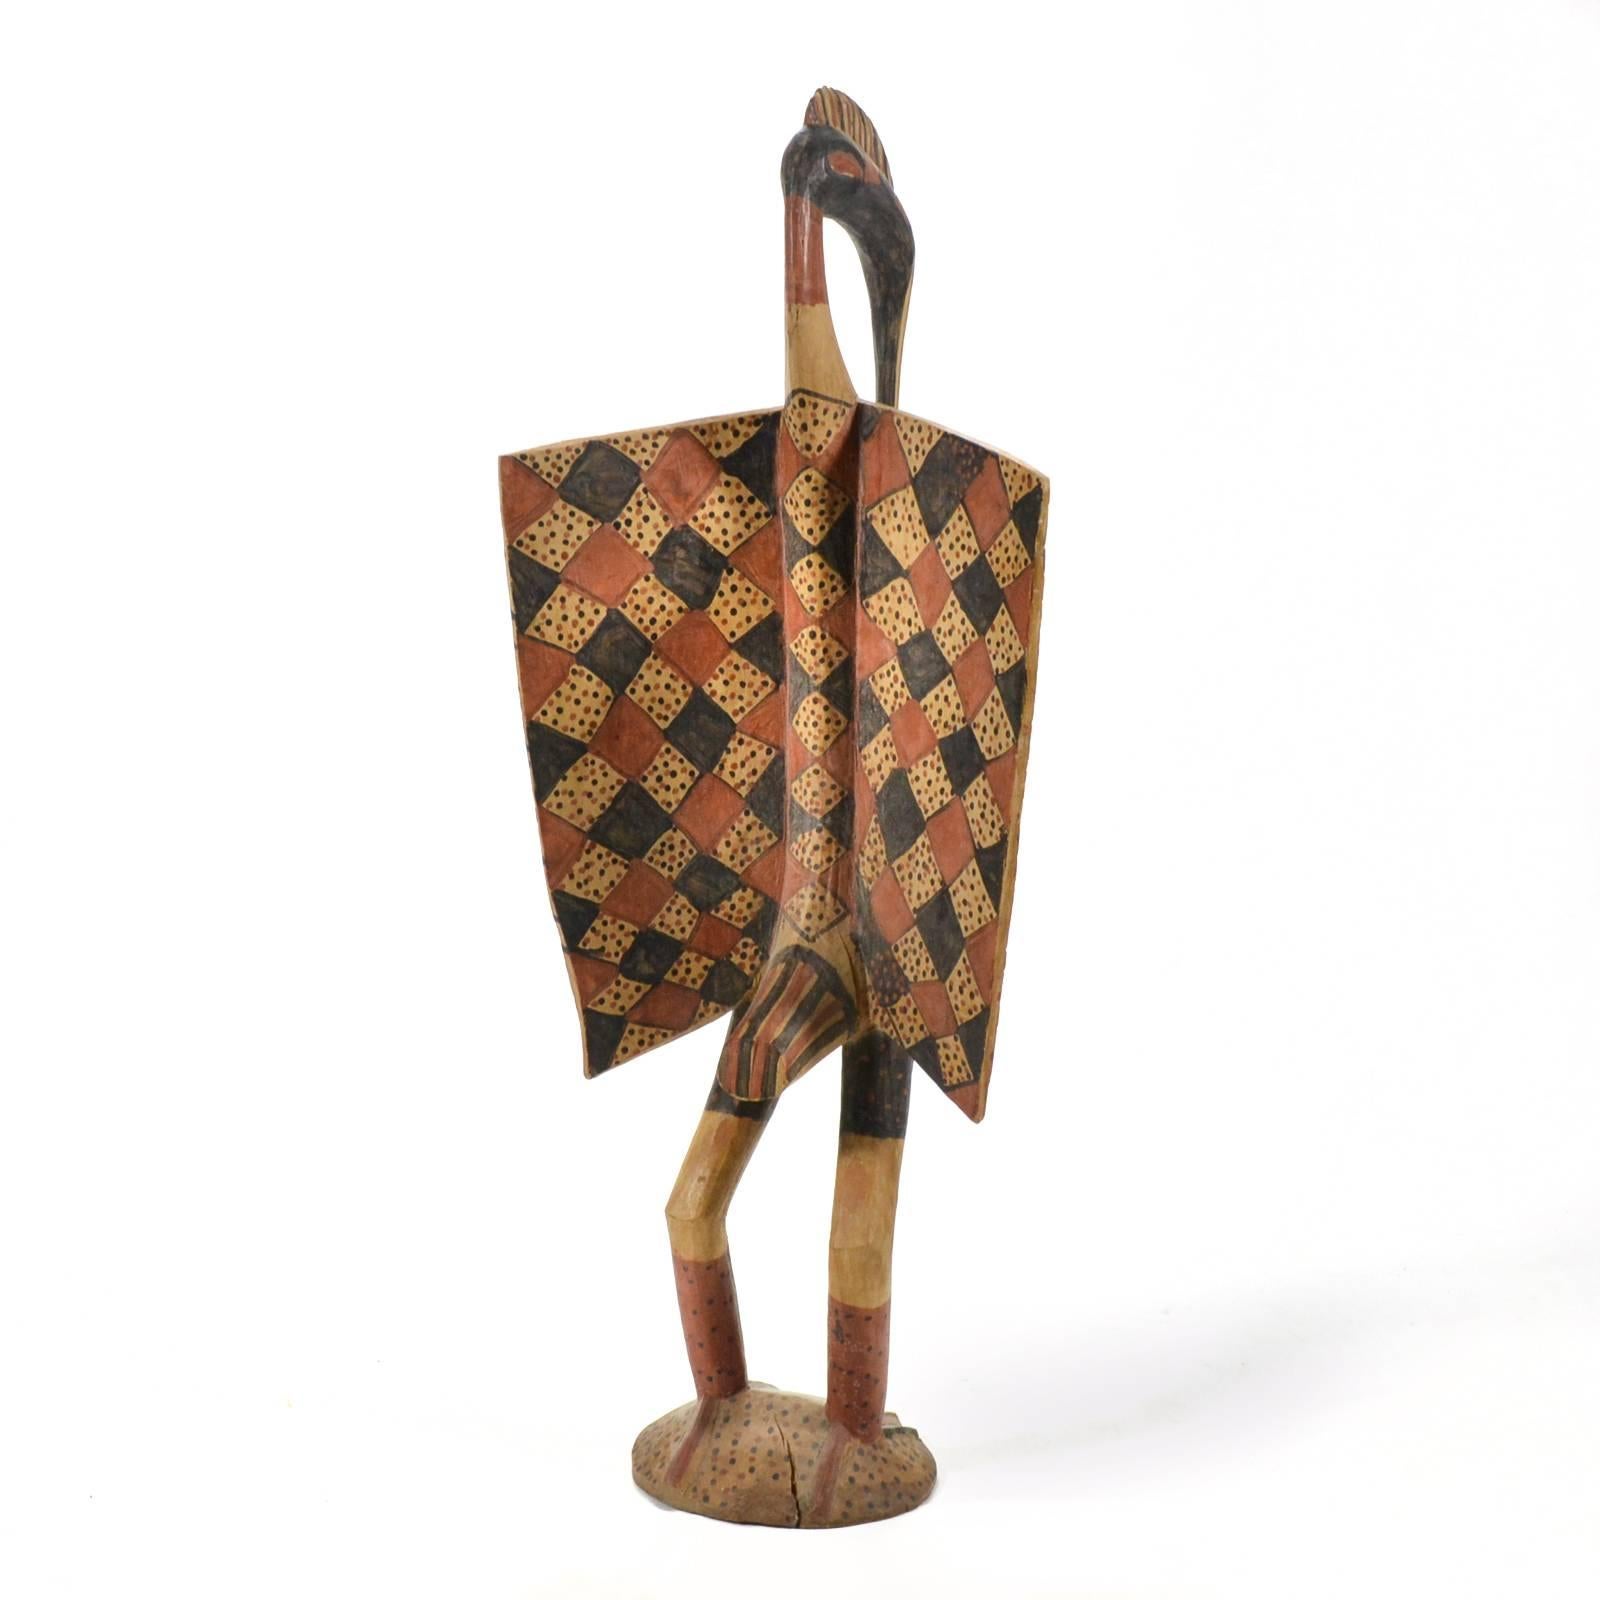 Primitive African Carved Hornbill Statue from the Ivory Coast